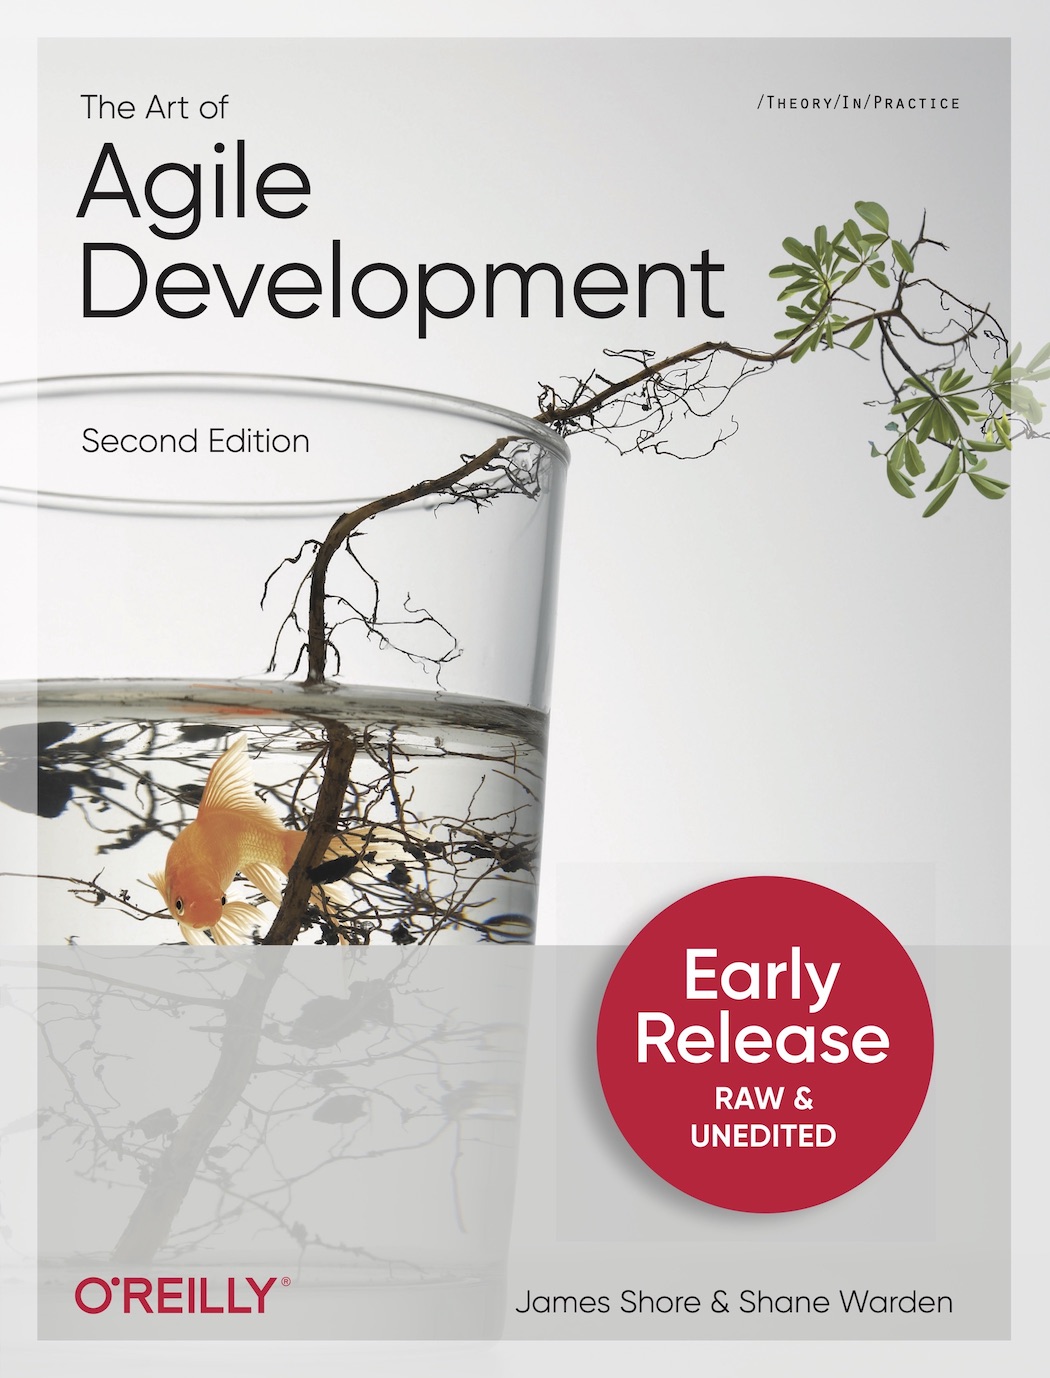 Book cover for “The Art of Agile Development, Second Edition” by James Shore and Shane Warden. The cover has a large sticker on it that says “Early Release: Raw and Unedited.”